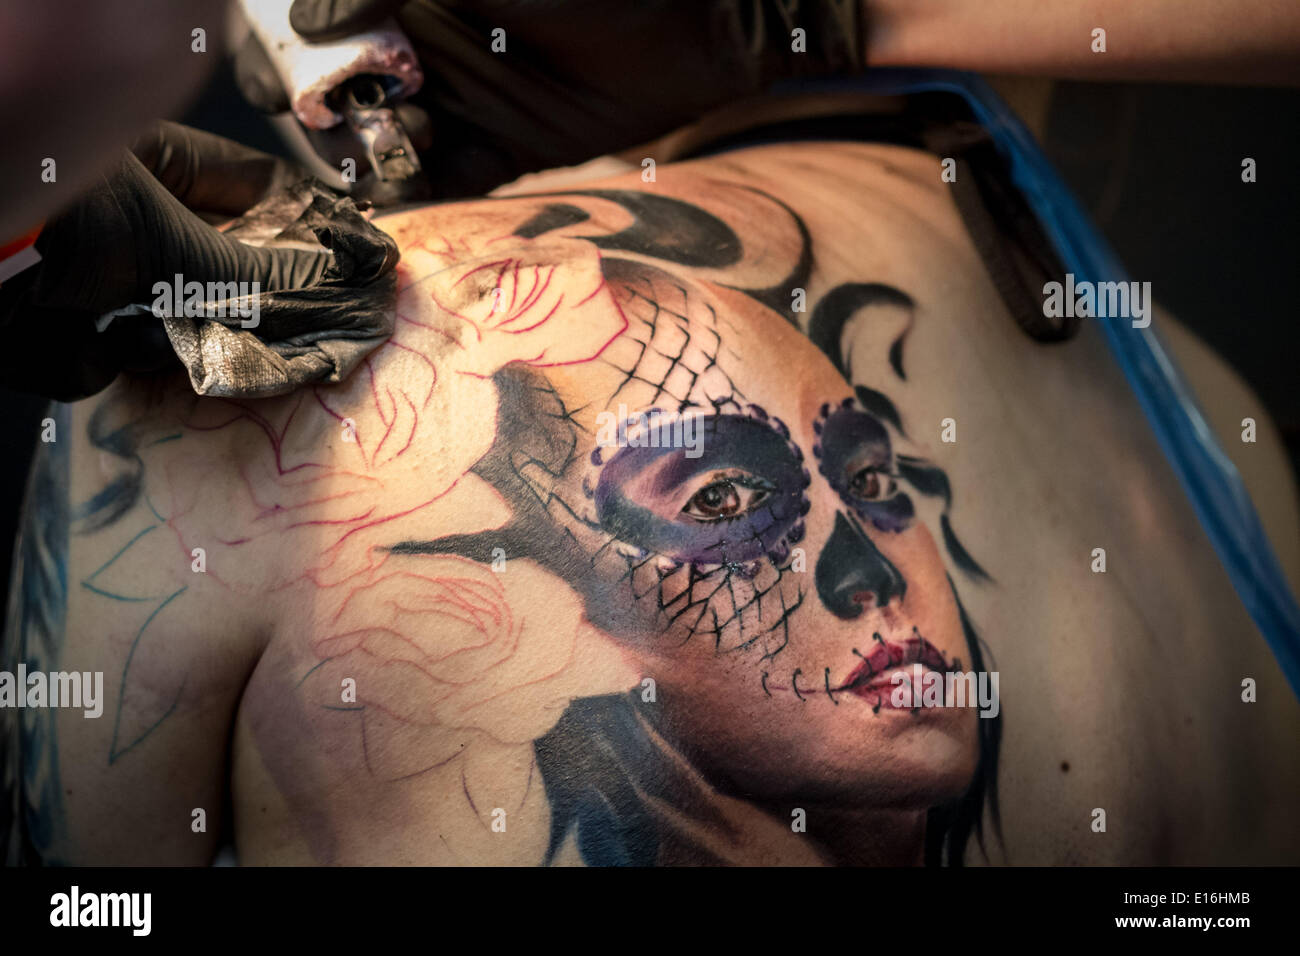 London, UK. 24th May, 2014. The Great British Tattoo Show 2014 in London Credit:  Guy Corbishley/Alamy Live News Stock Photo